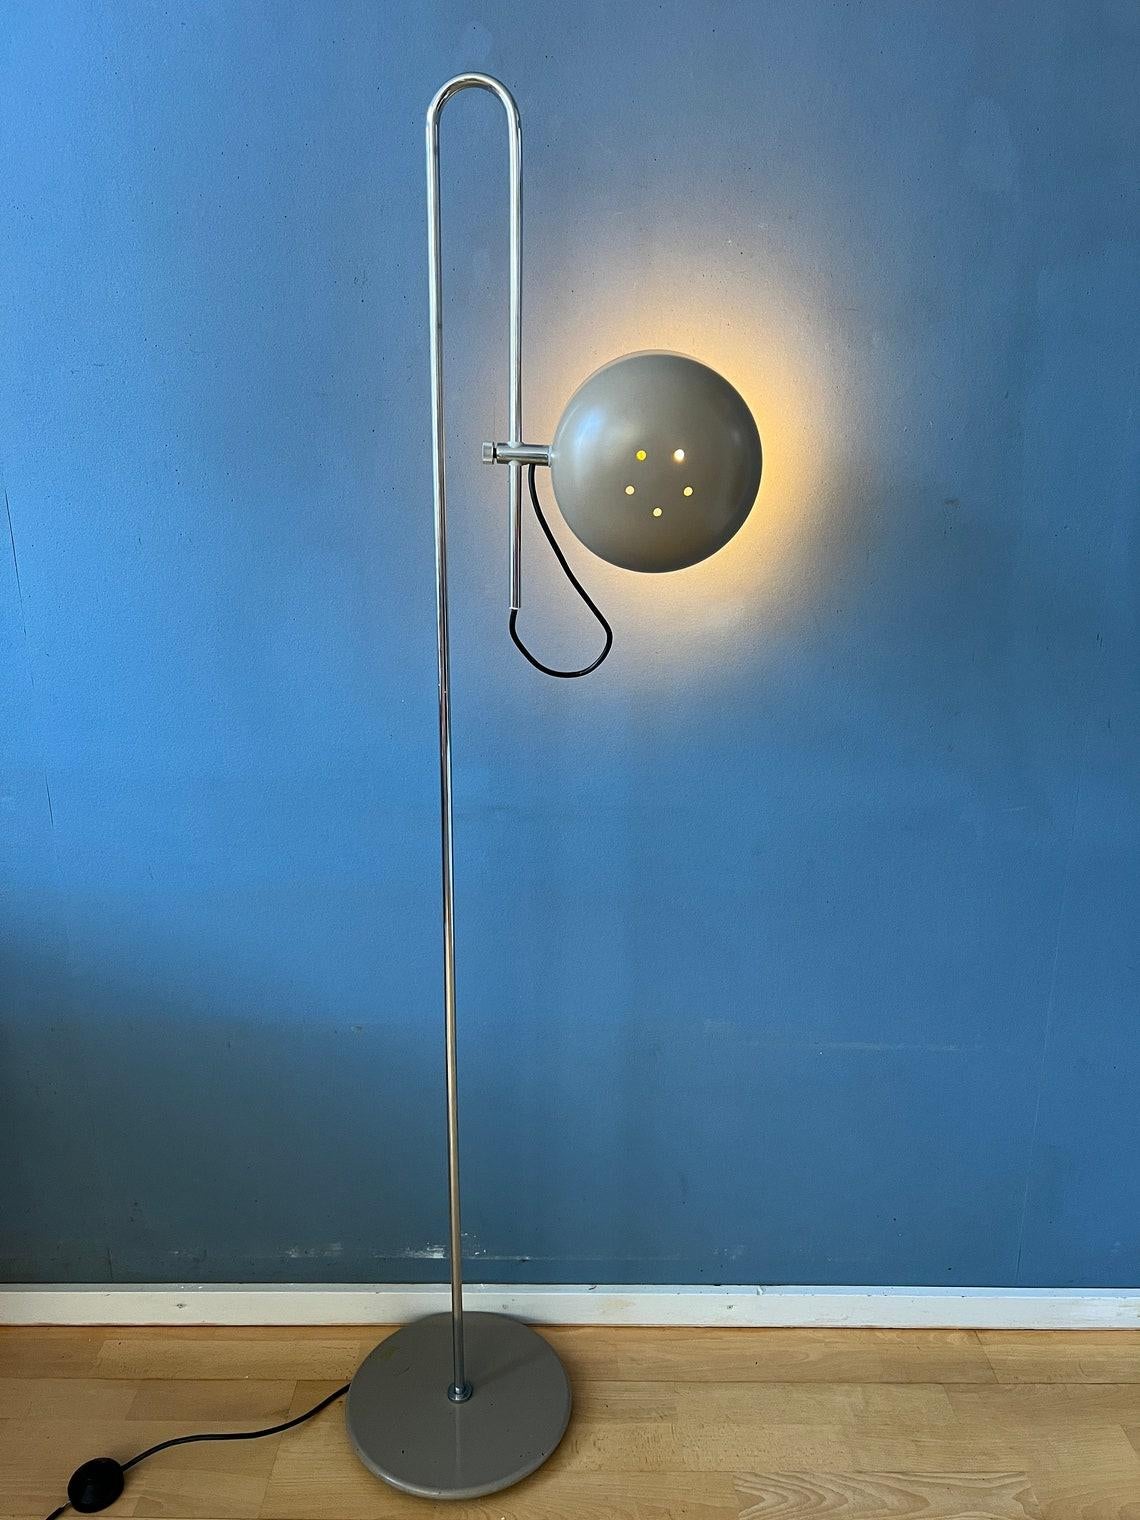 Very rare flexible taupe-like floor lamp. The shade can move up and down the pole. Also the shade itself can be adjusted. The lamp requires two E26/27 lightbulbs and currently has an EU-plug (easily used outside EU with plug-converter).

Additional